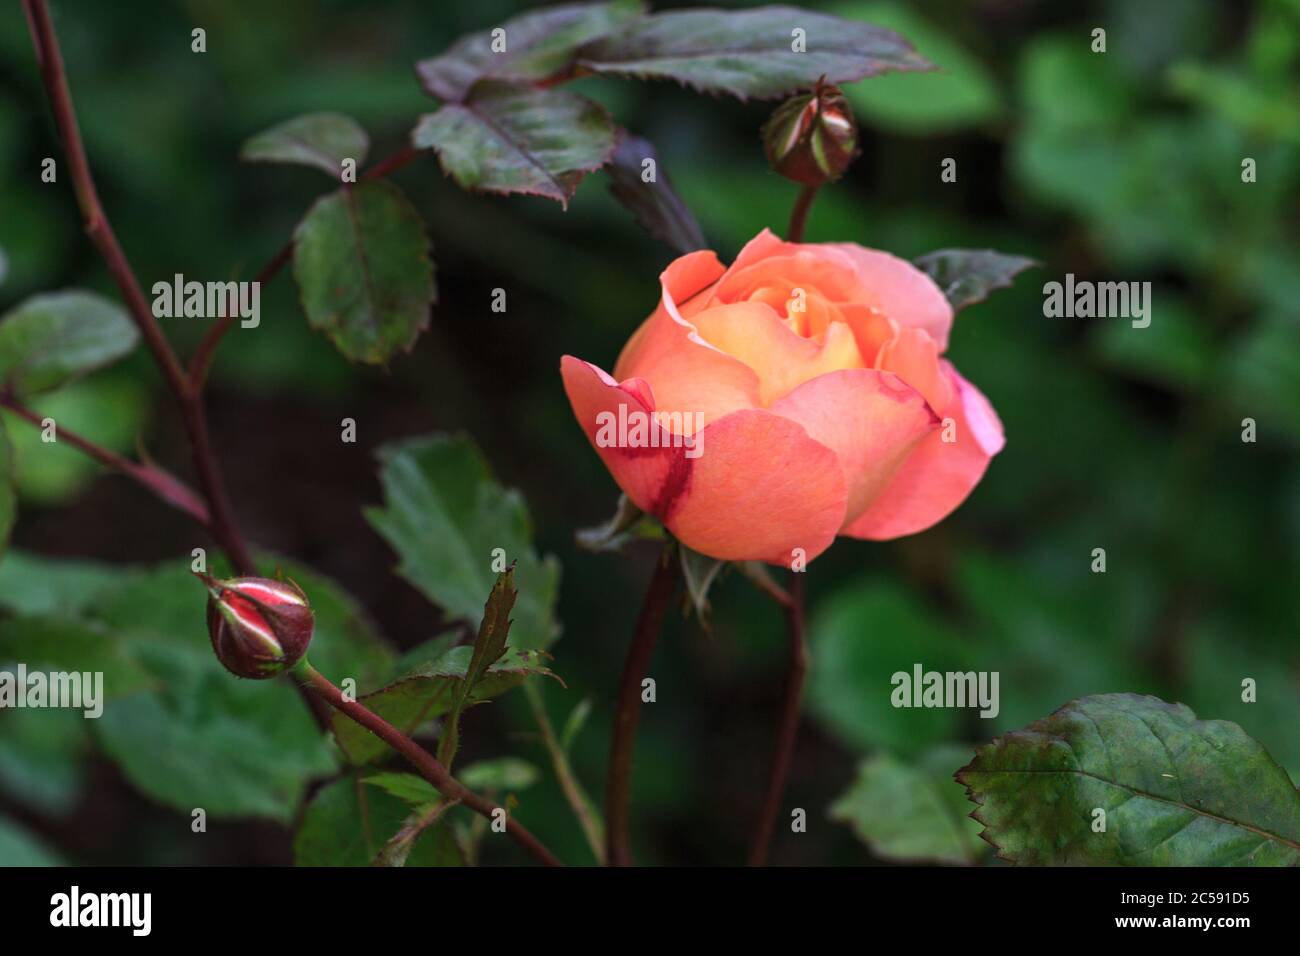 Blooming tangerine-orange English rose in the garden on a sunny day. Rose Lady Emma Hamilton Stock Photo